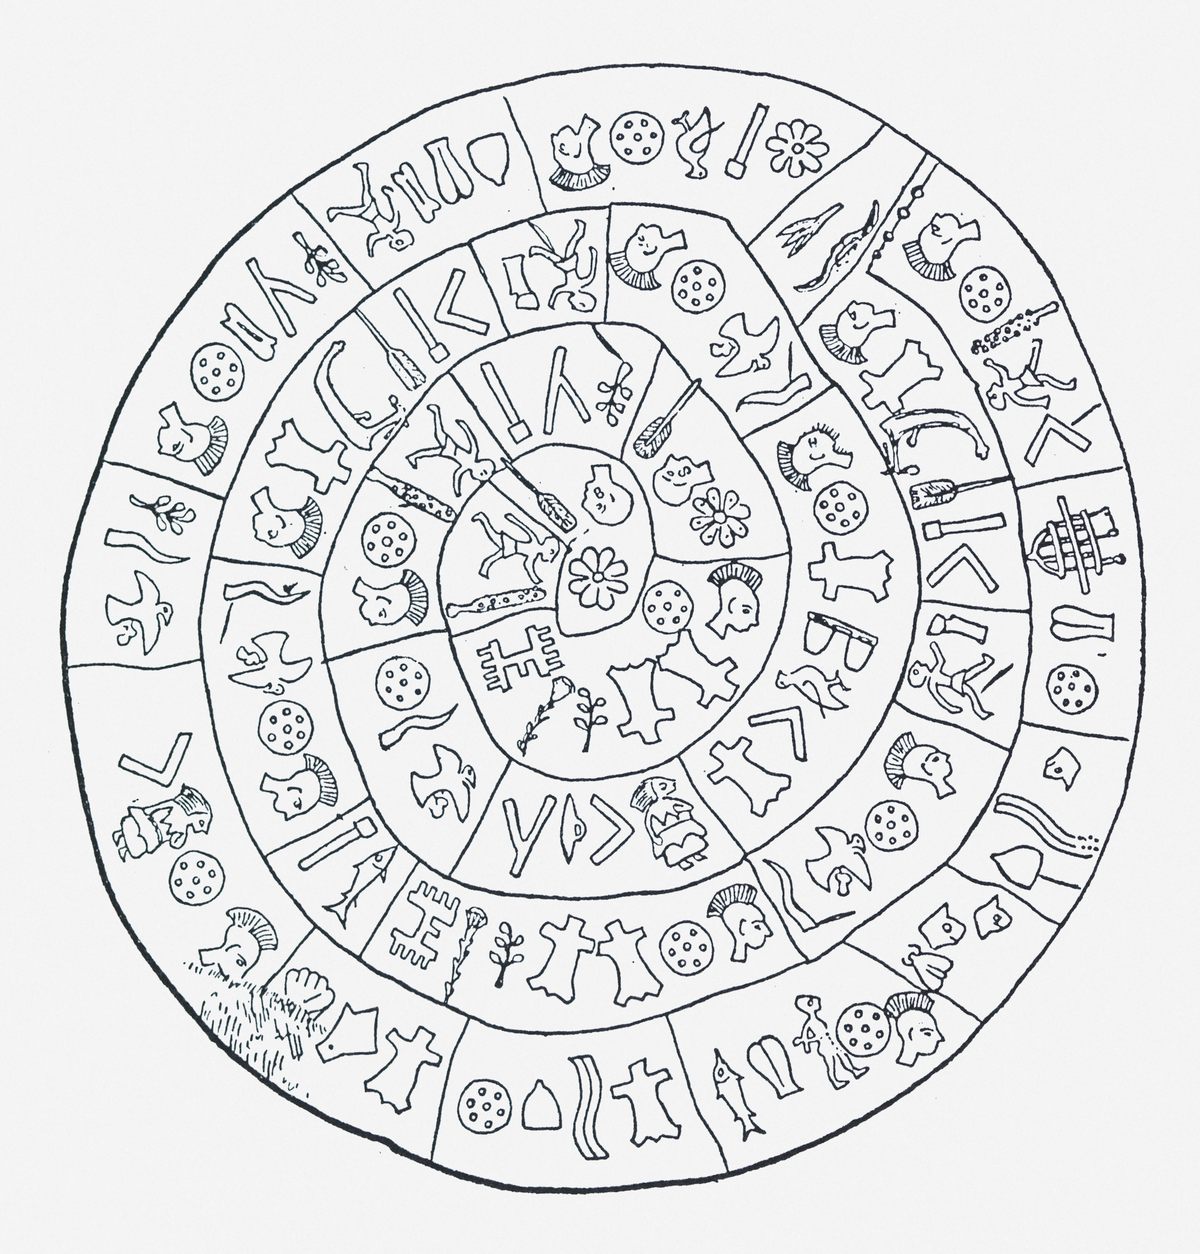 The Phaistos Disc features 242 symbols stamped into the clay before firing.